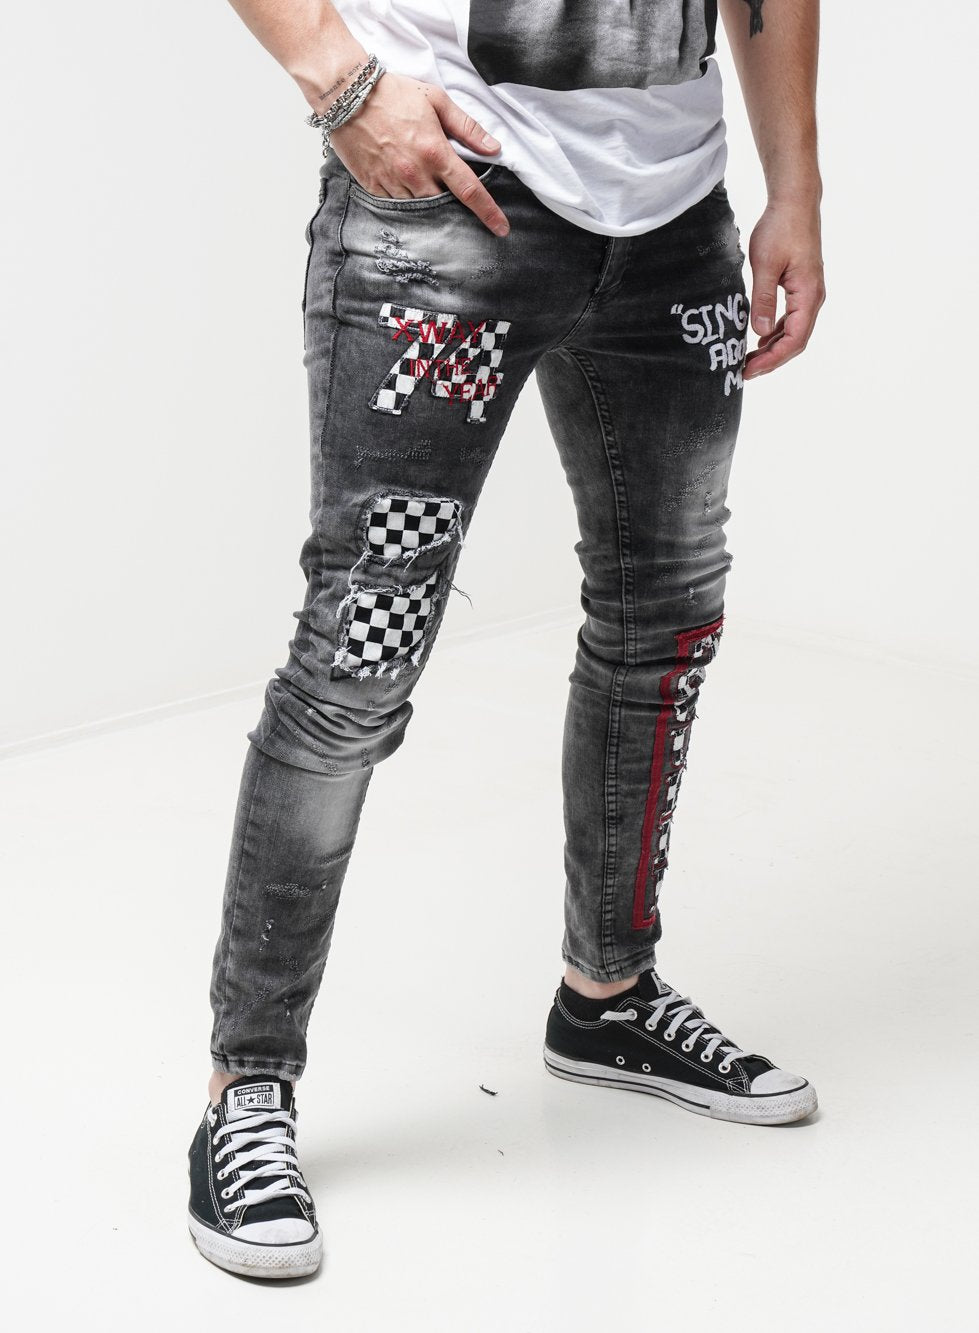 GINZOUS Men's Black and White Plaid Print Jeans Size 28 at Amazon Men's  Clothing store